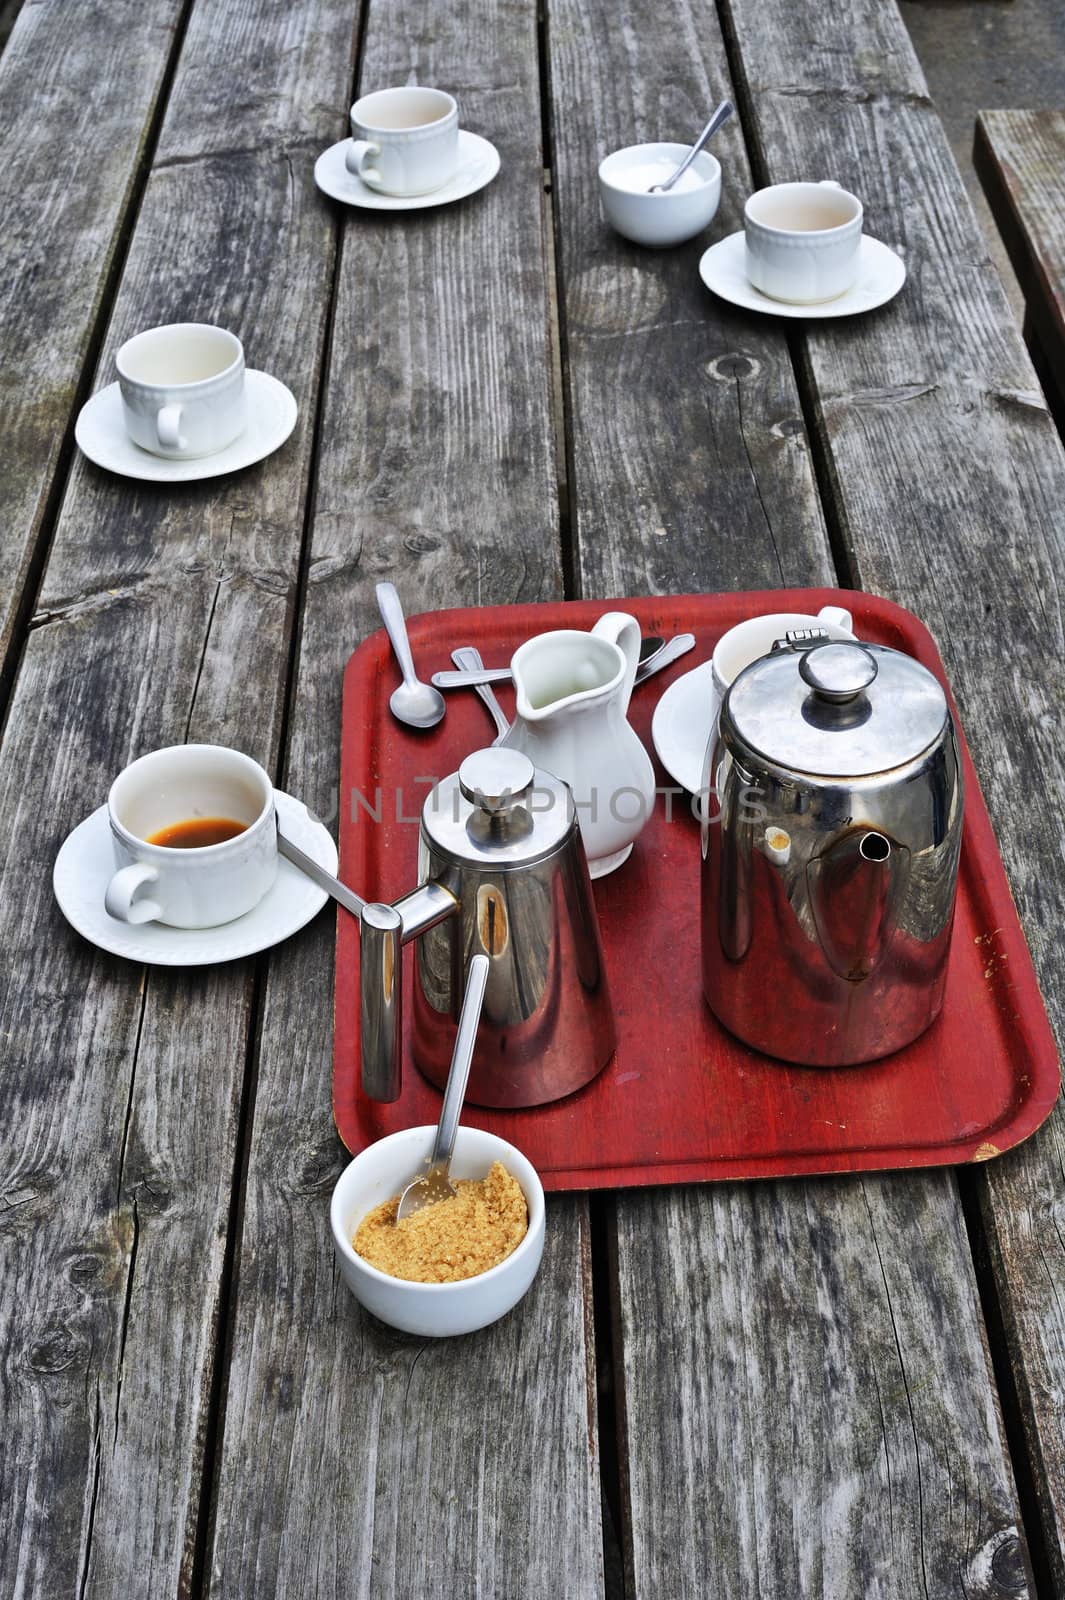 Empty cups on a wooden table, after a pot of tea has been drunk at an outdoor cafe